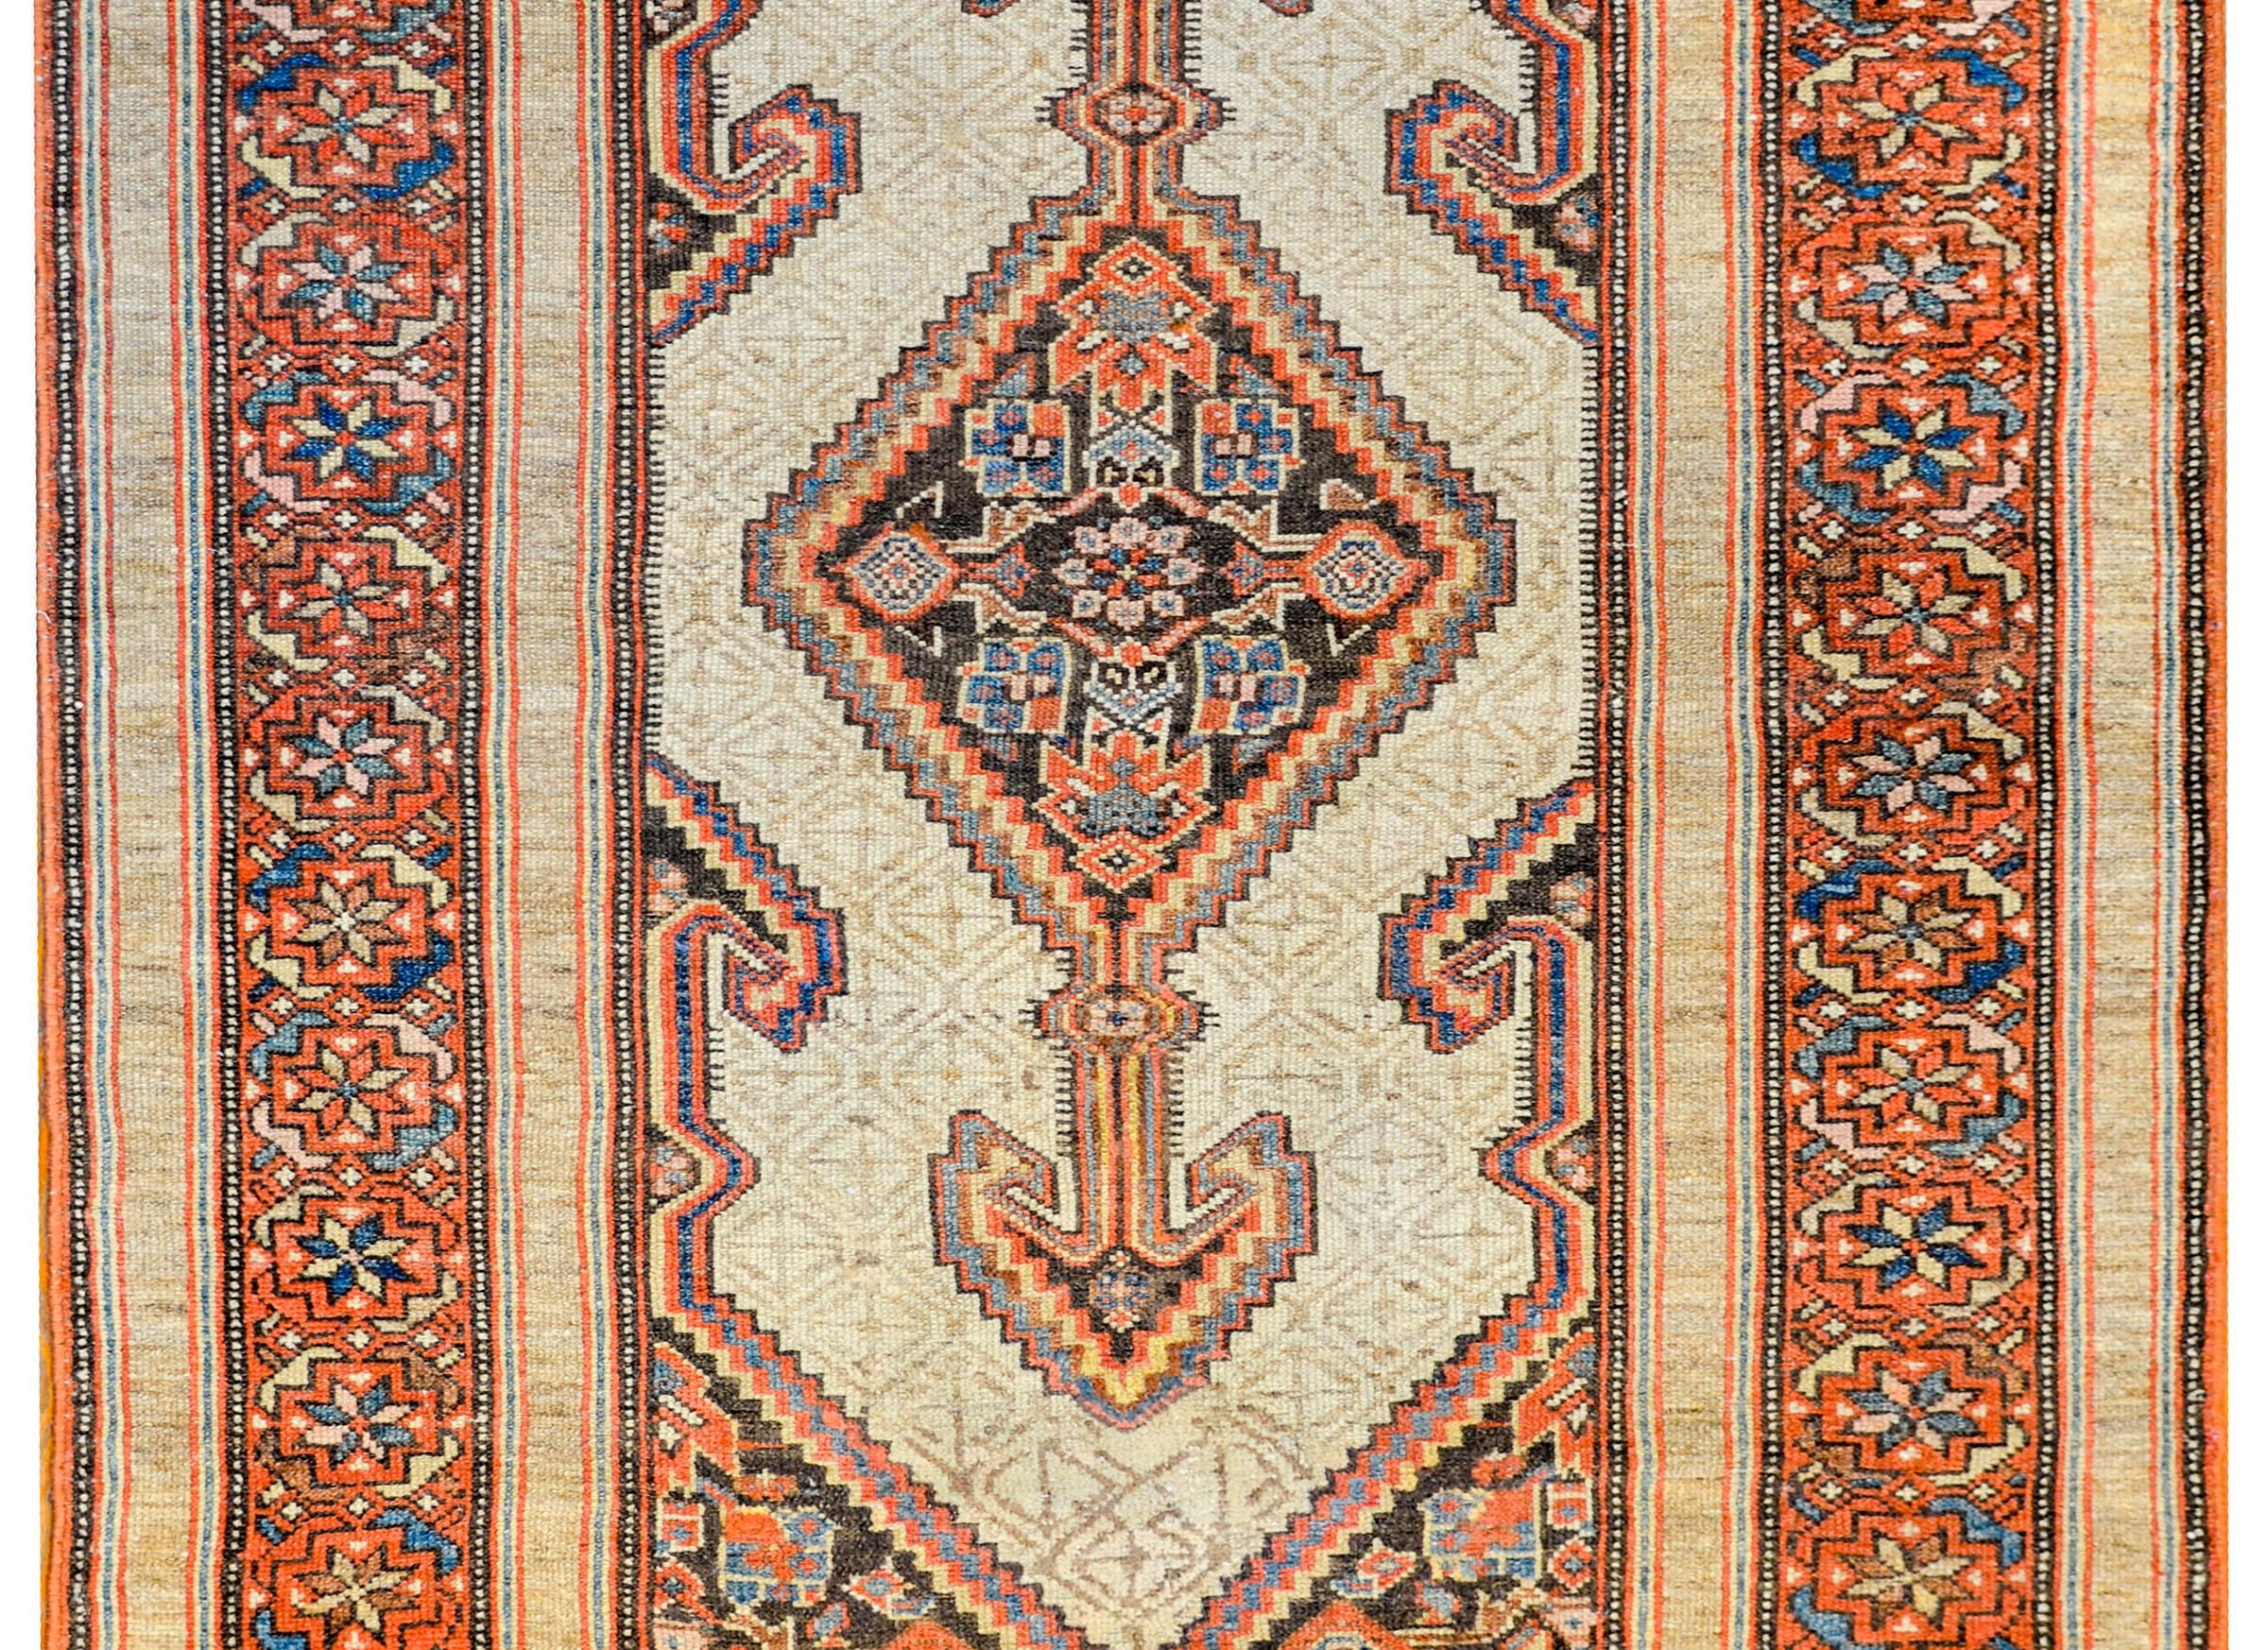 A gorgeous late 19th century Persian Serab rug with an incredible skillfully woven pattern. There is one wonderful diamond medallion, each composed with flowers, shrimp, and stylized vines. The medallions are on a sophisticated field of camel hair